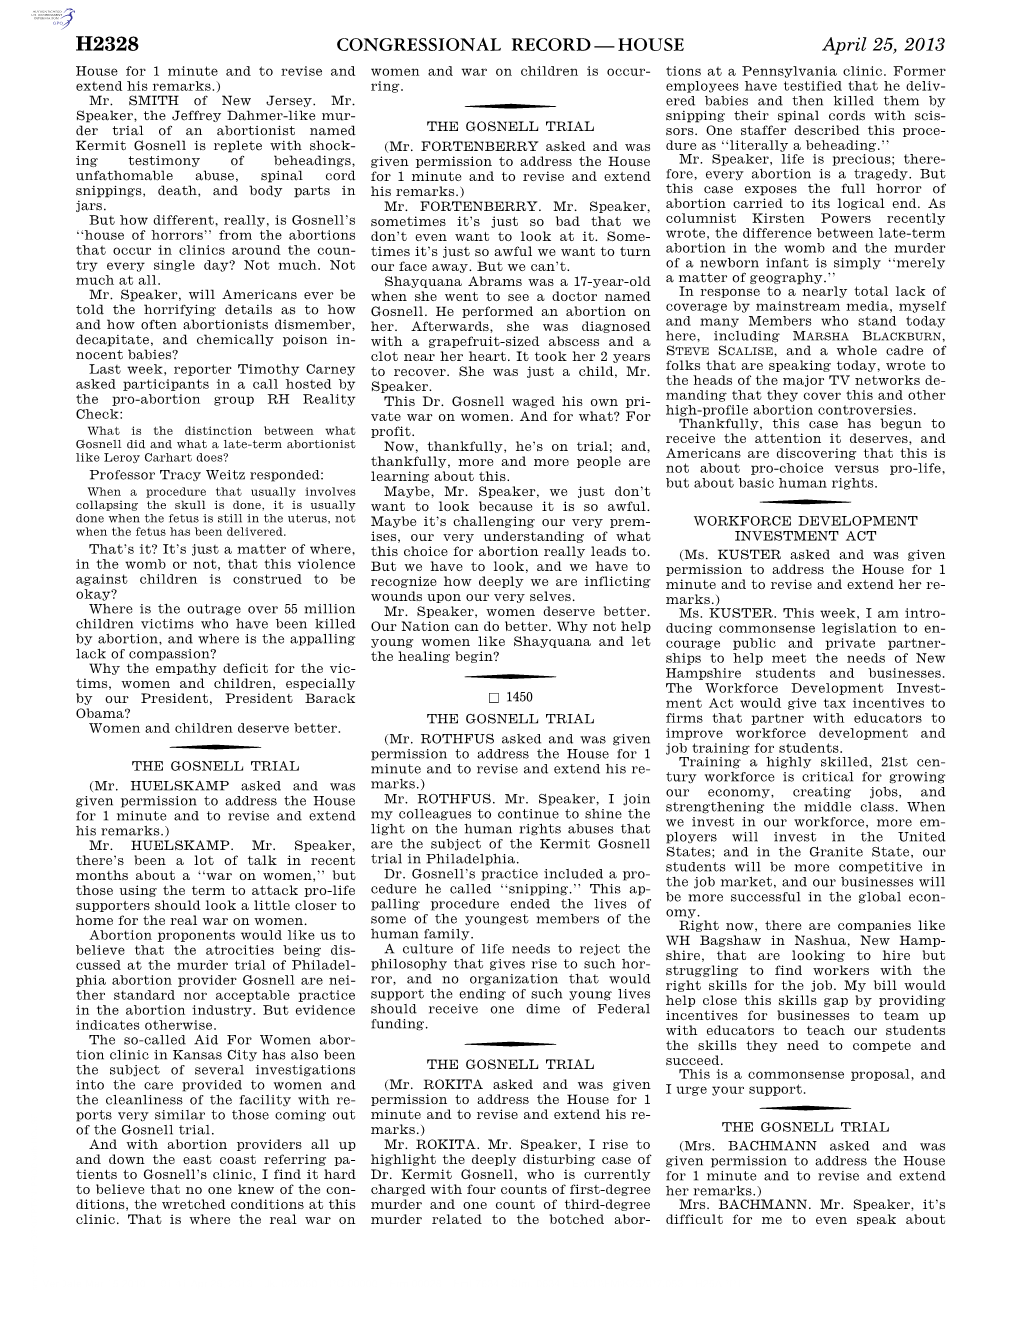 Congressional Record—House H2328